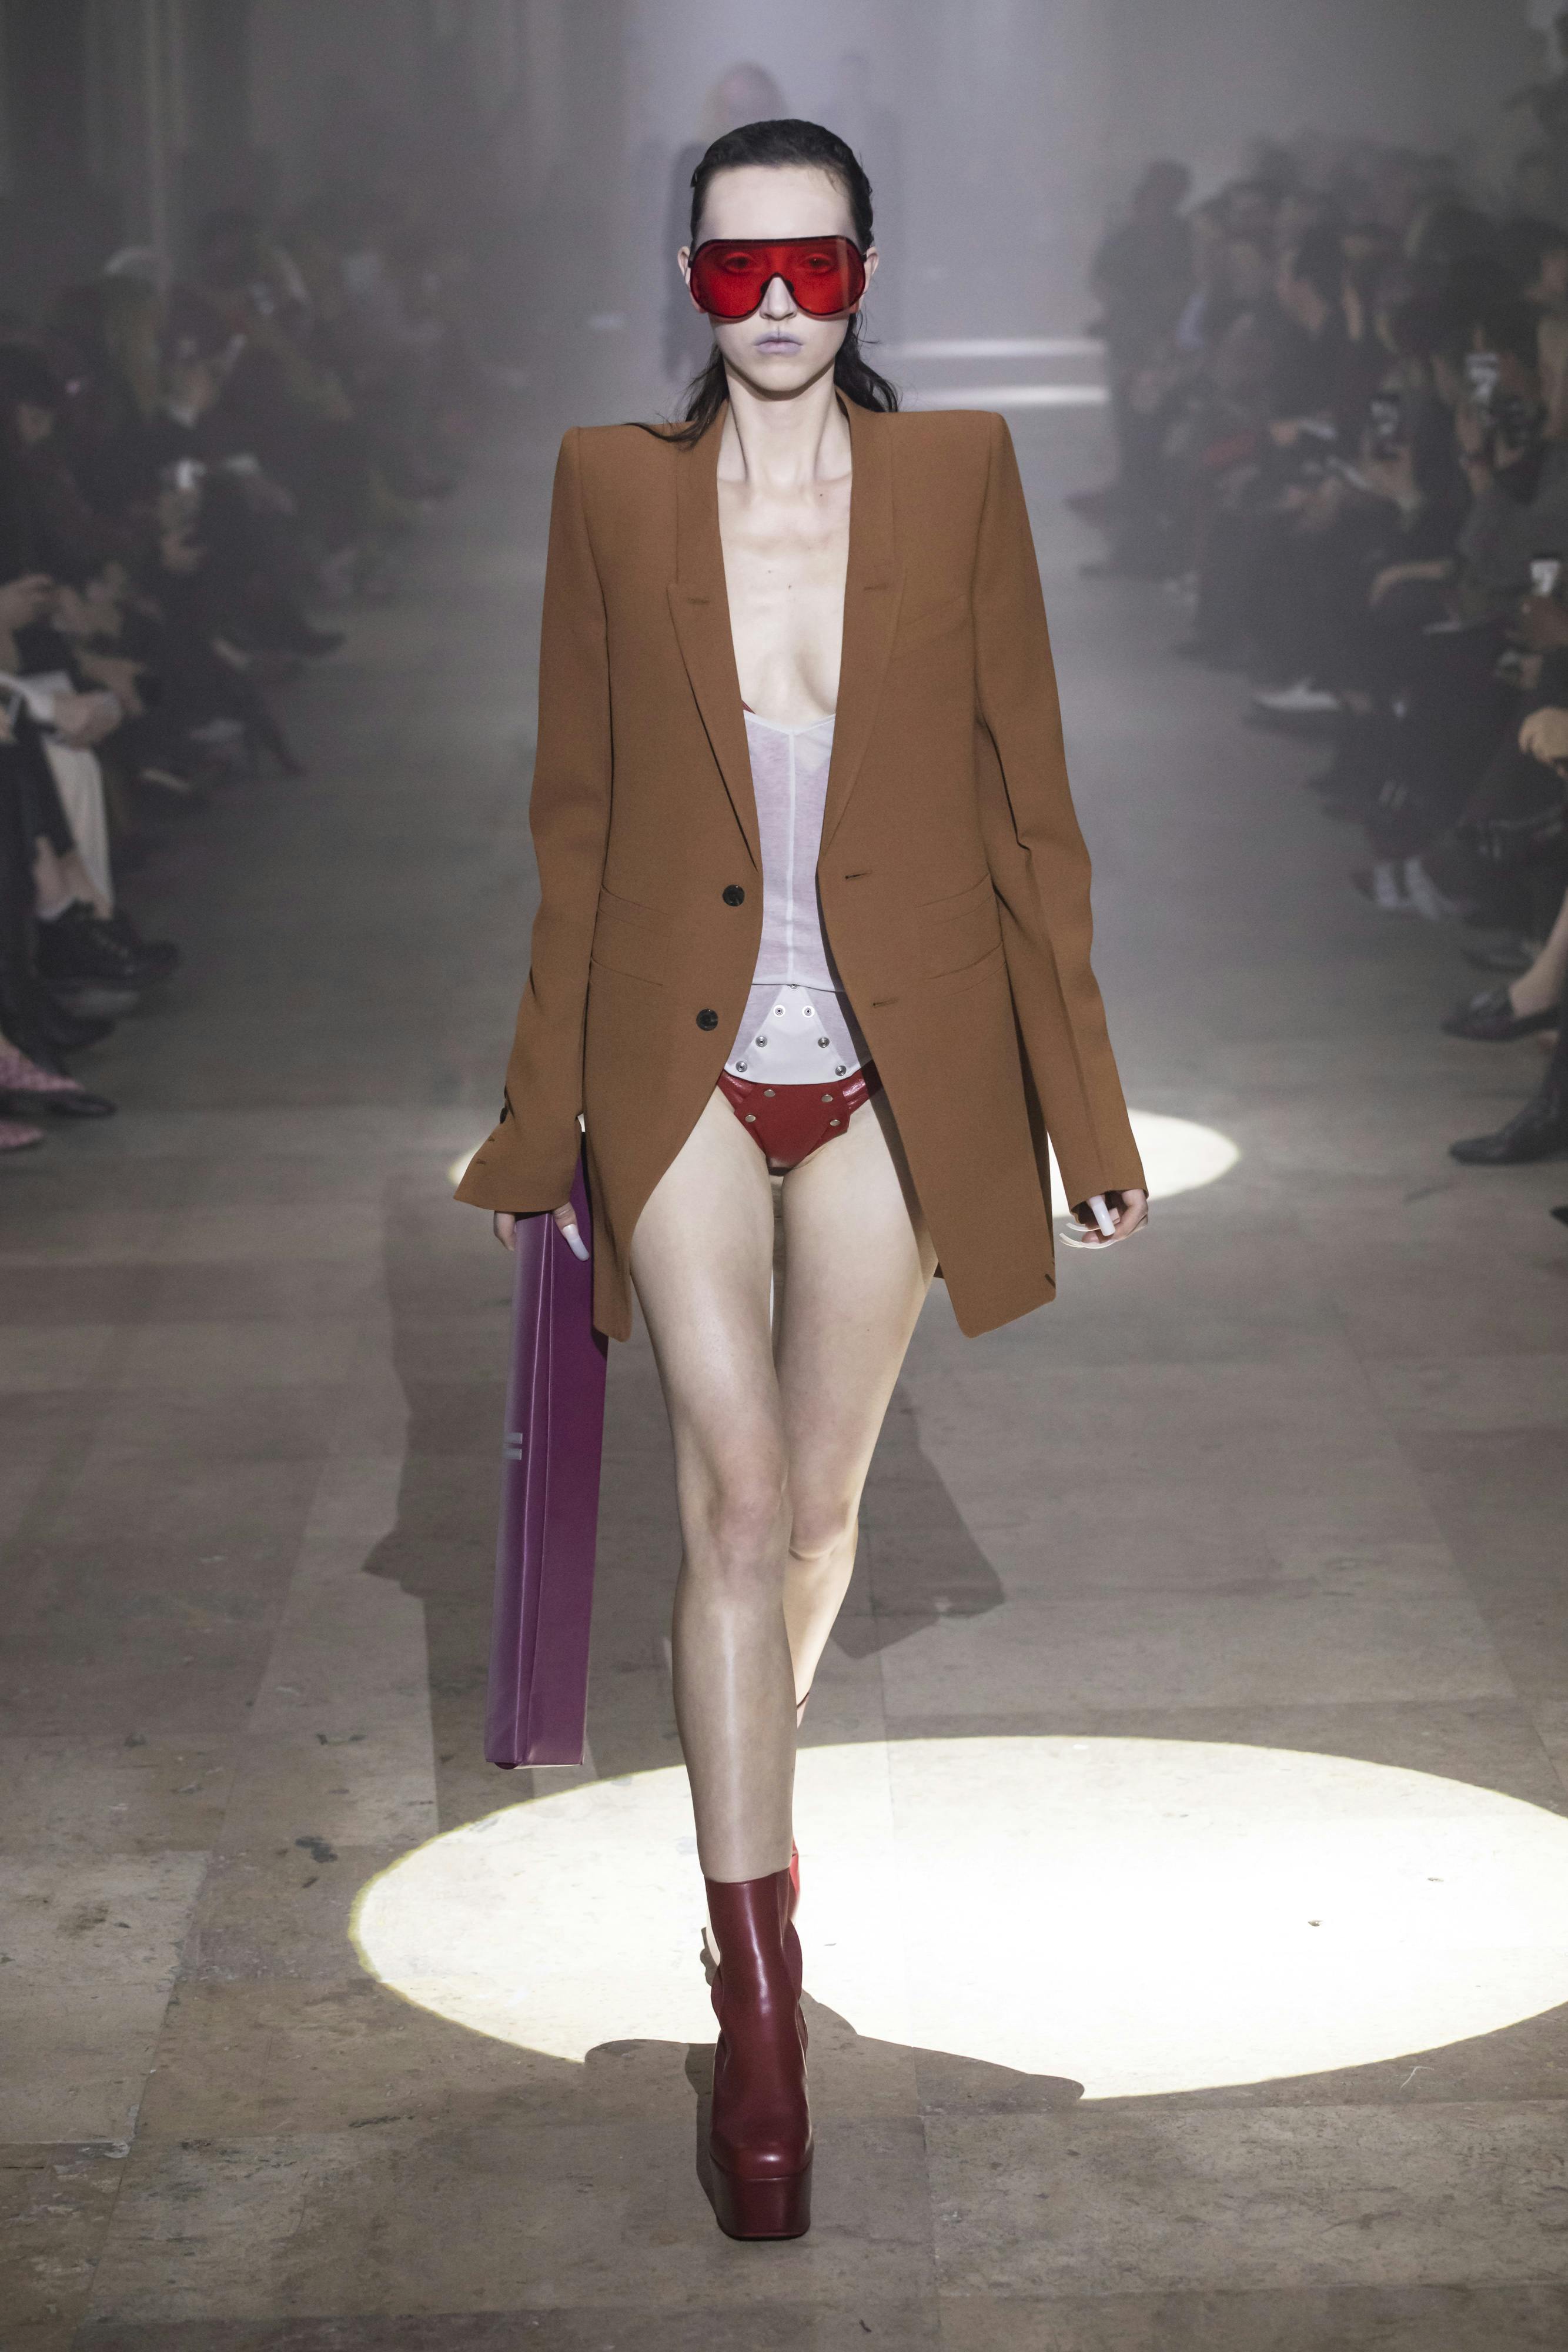 Rick Owens Runway Red Sheild Sunglasses Brown Long Blazer White Sally Bodysuit Red Kiss Leather Boots Womens FW19 Larry